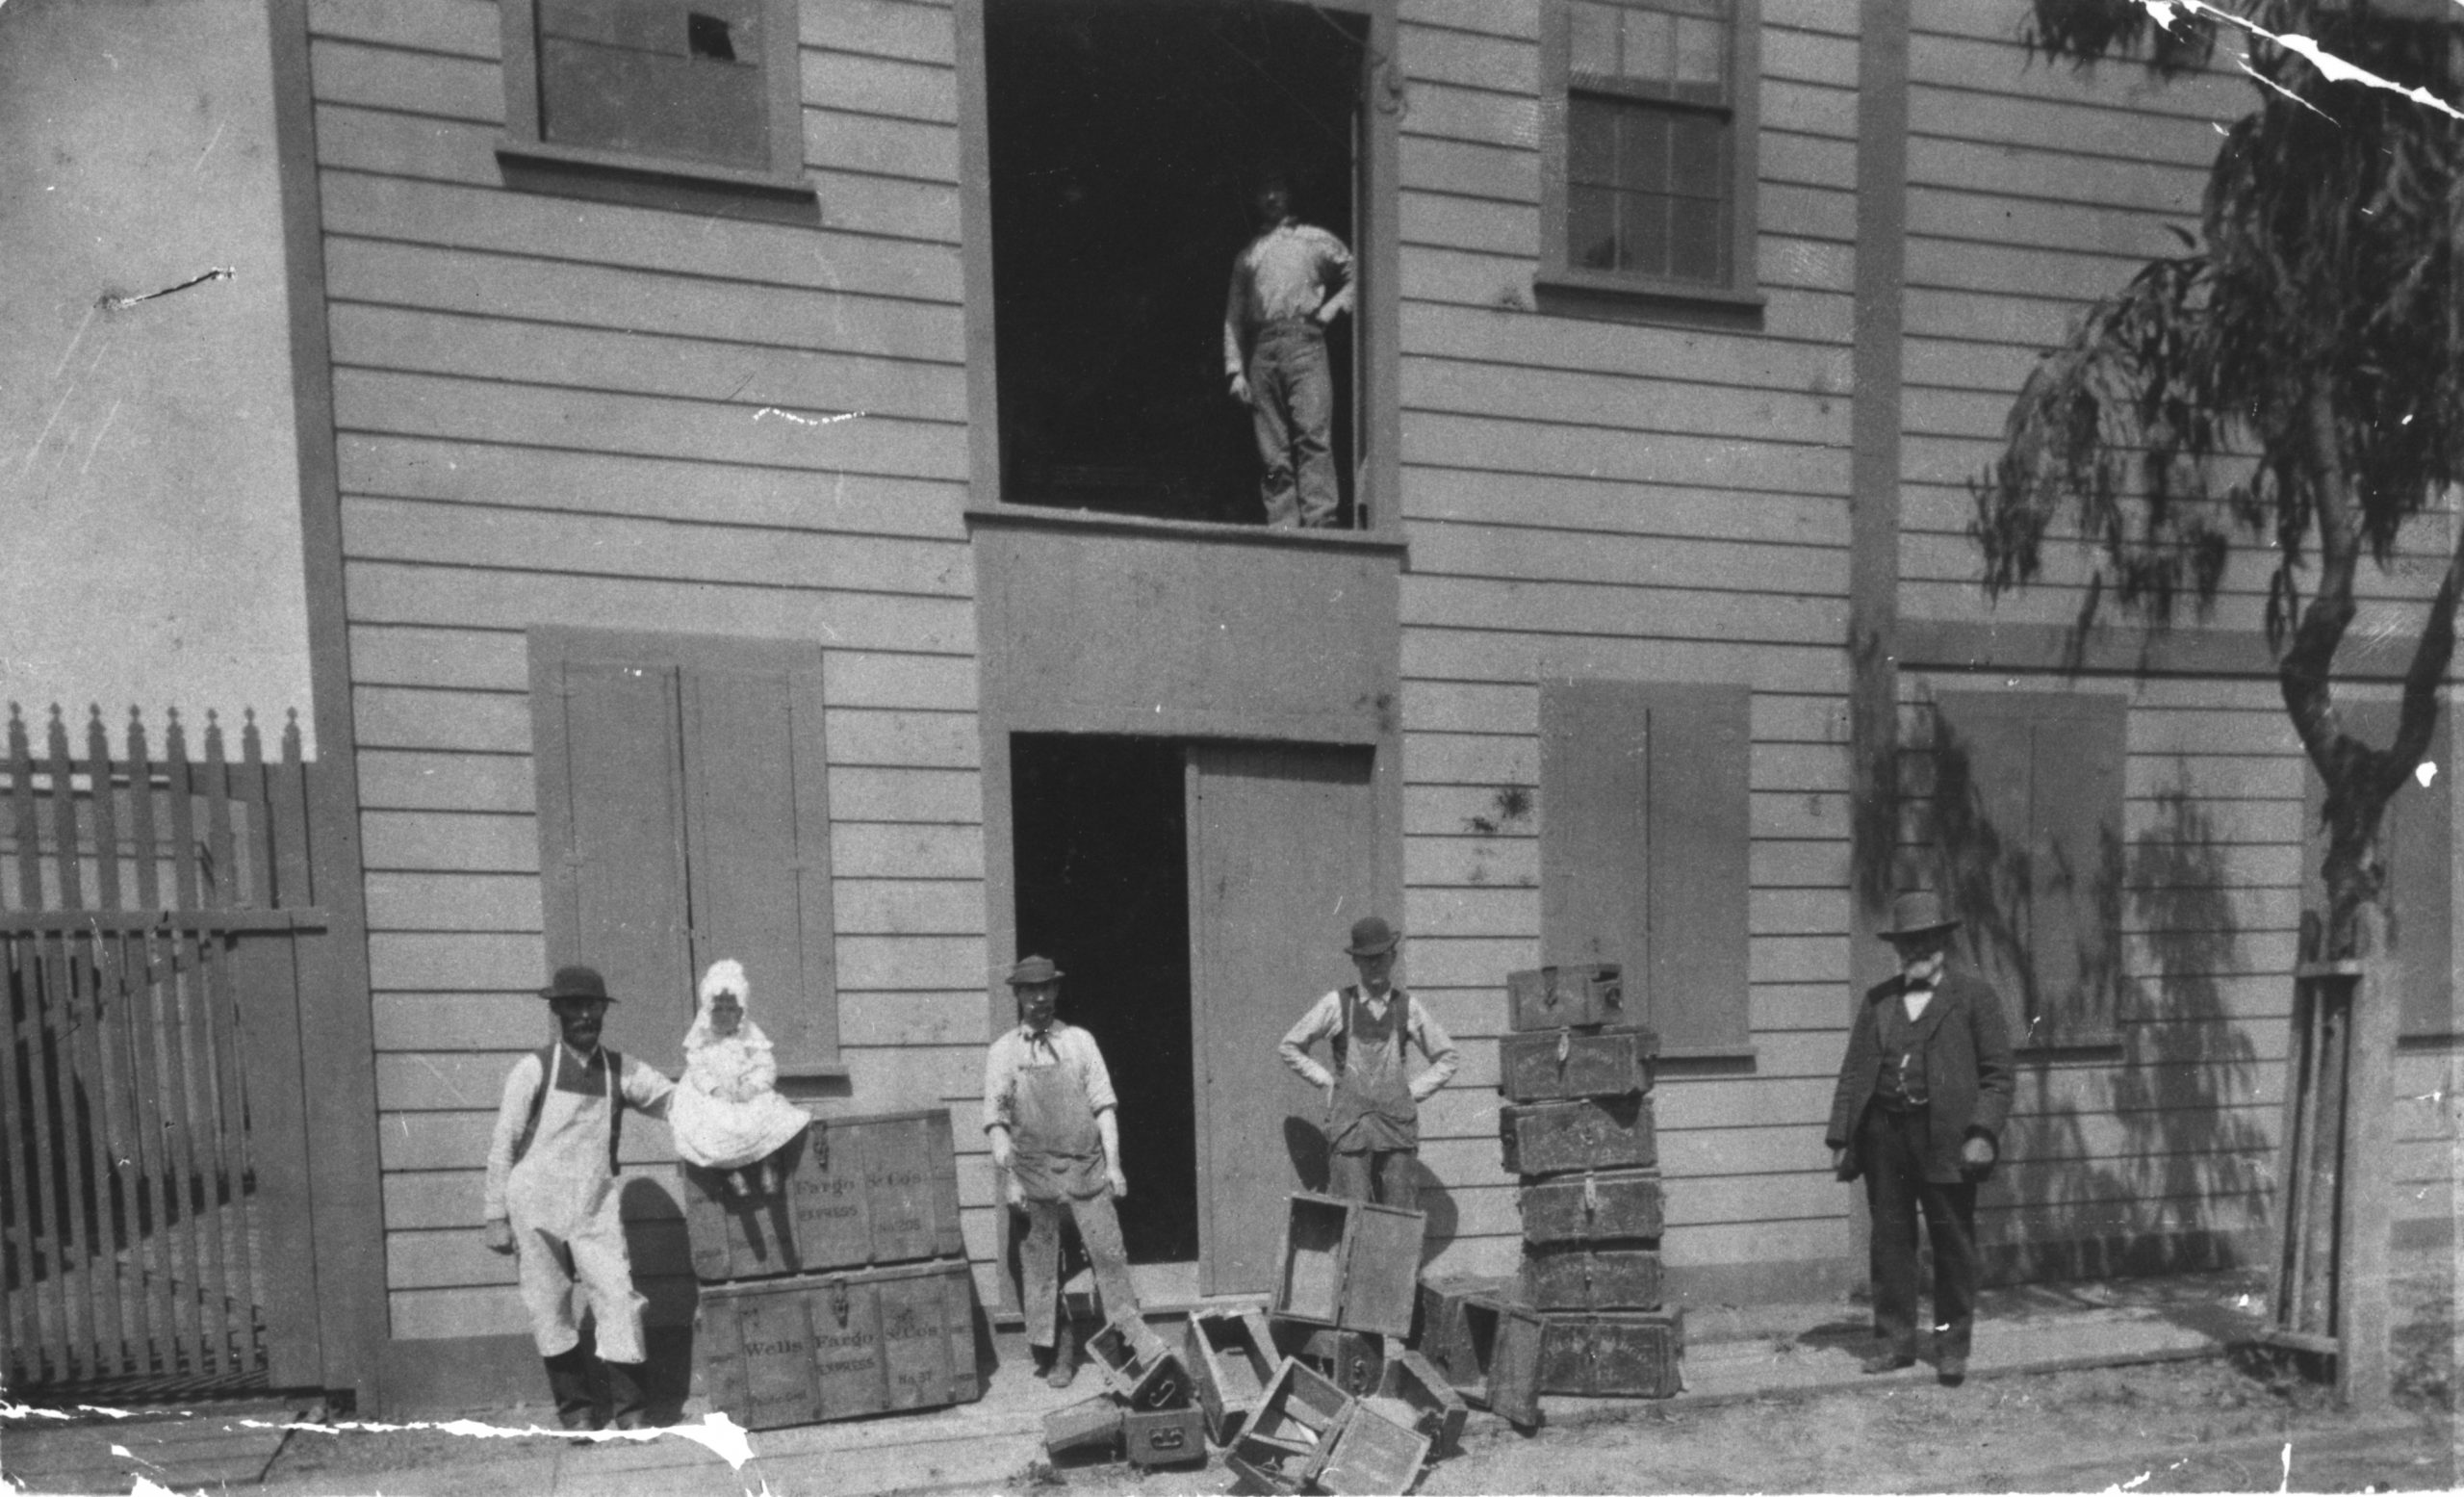 A black and white photo of building front shows five men in work clothes and stacks of wood boxes. A little girl sits on top of one stack of boxes. The older, bearded man at right is J.Y. Ayer.